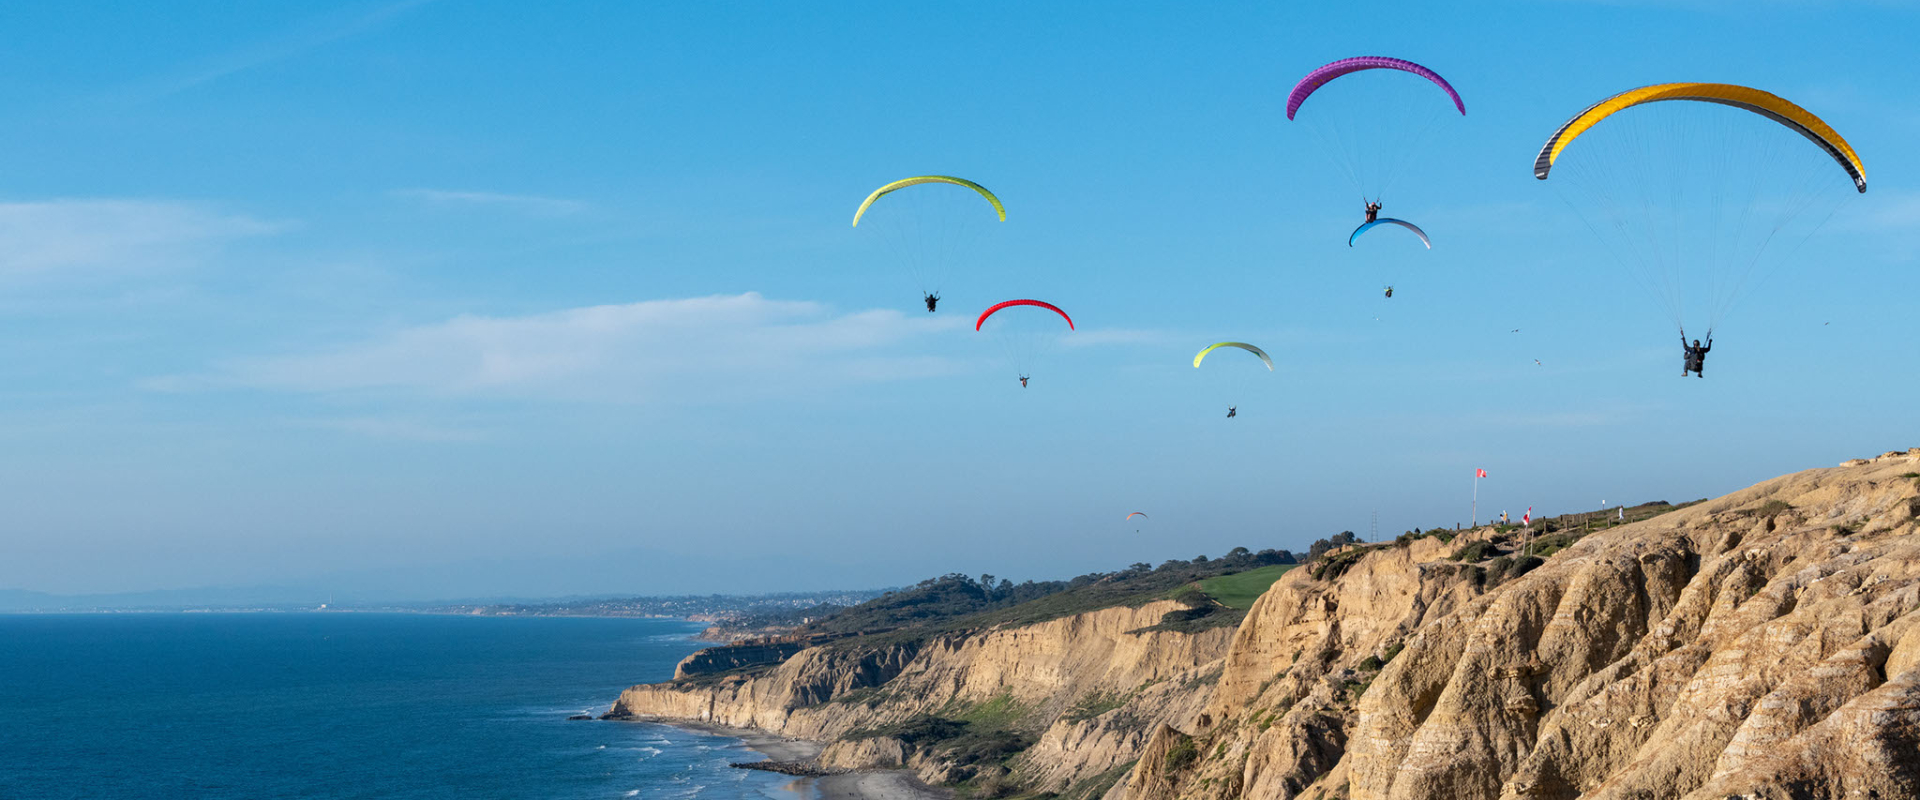 paragliders on the coast